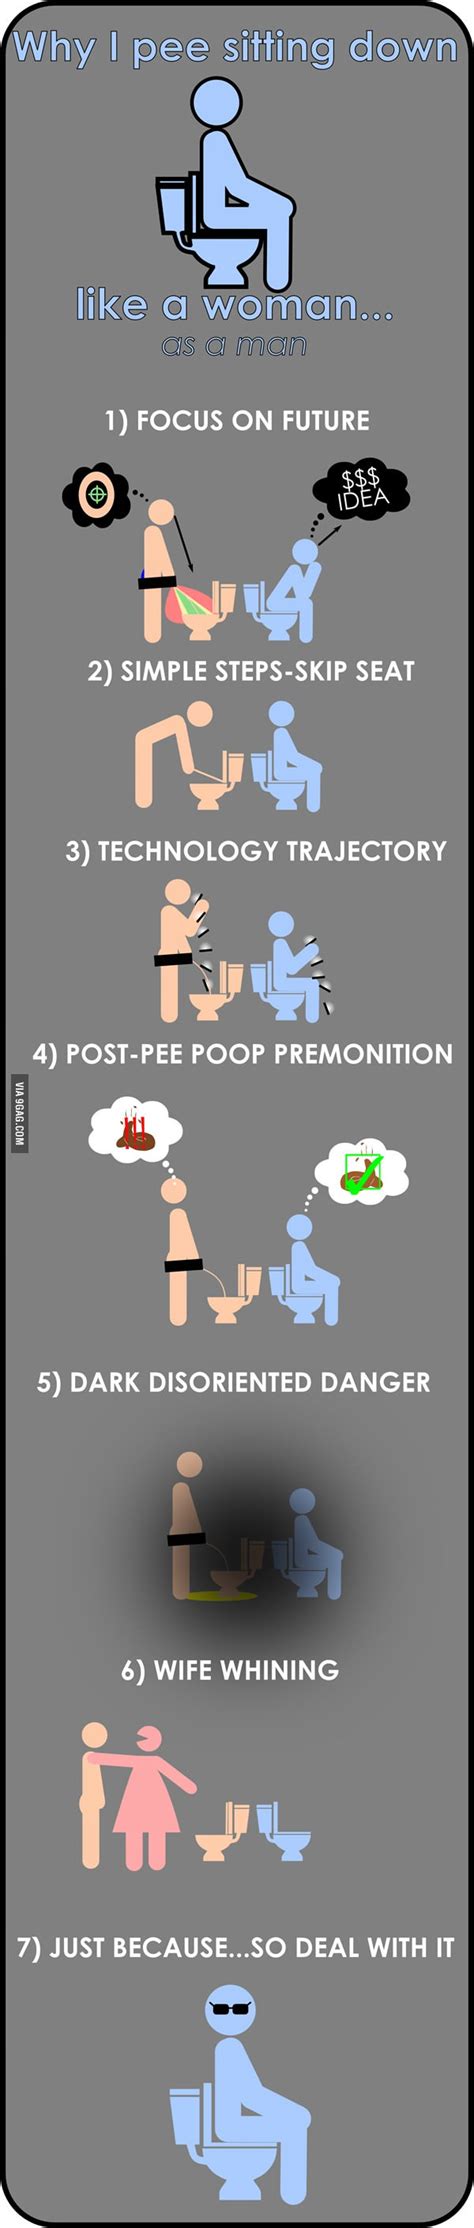 7 reasons why i pee sitting down like a woman as a man meme pictures funny photos lets